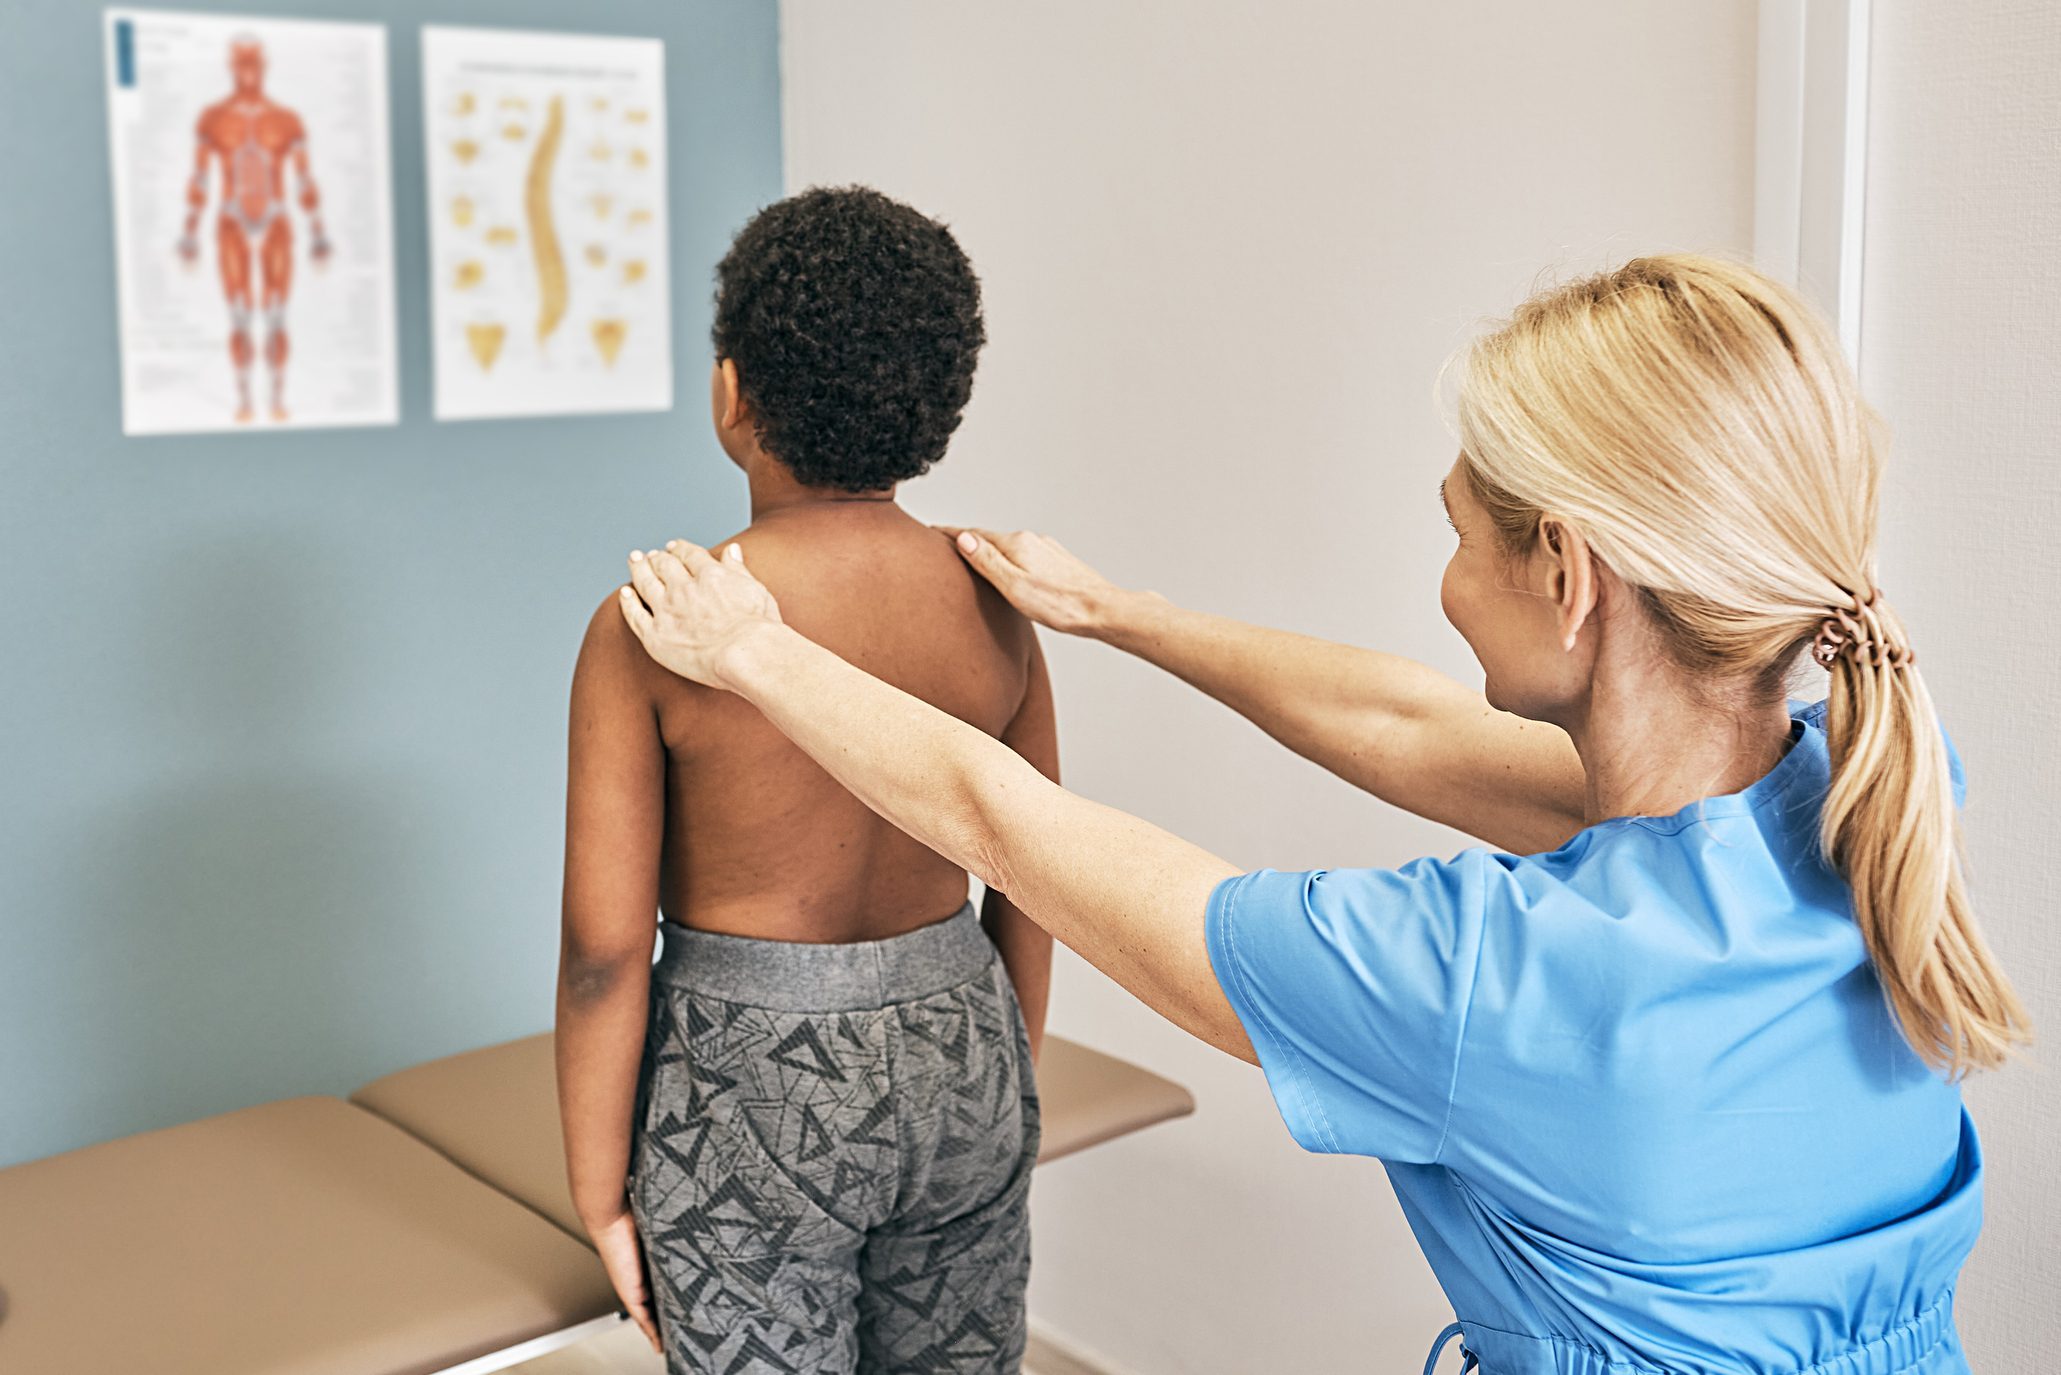 Parents: Here's What You Need to Know About Scheuermann's Kyphosis